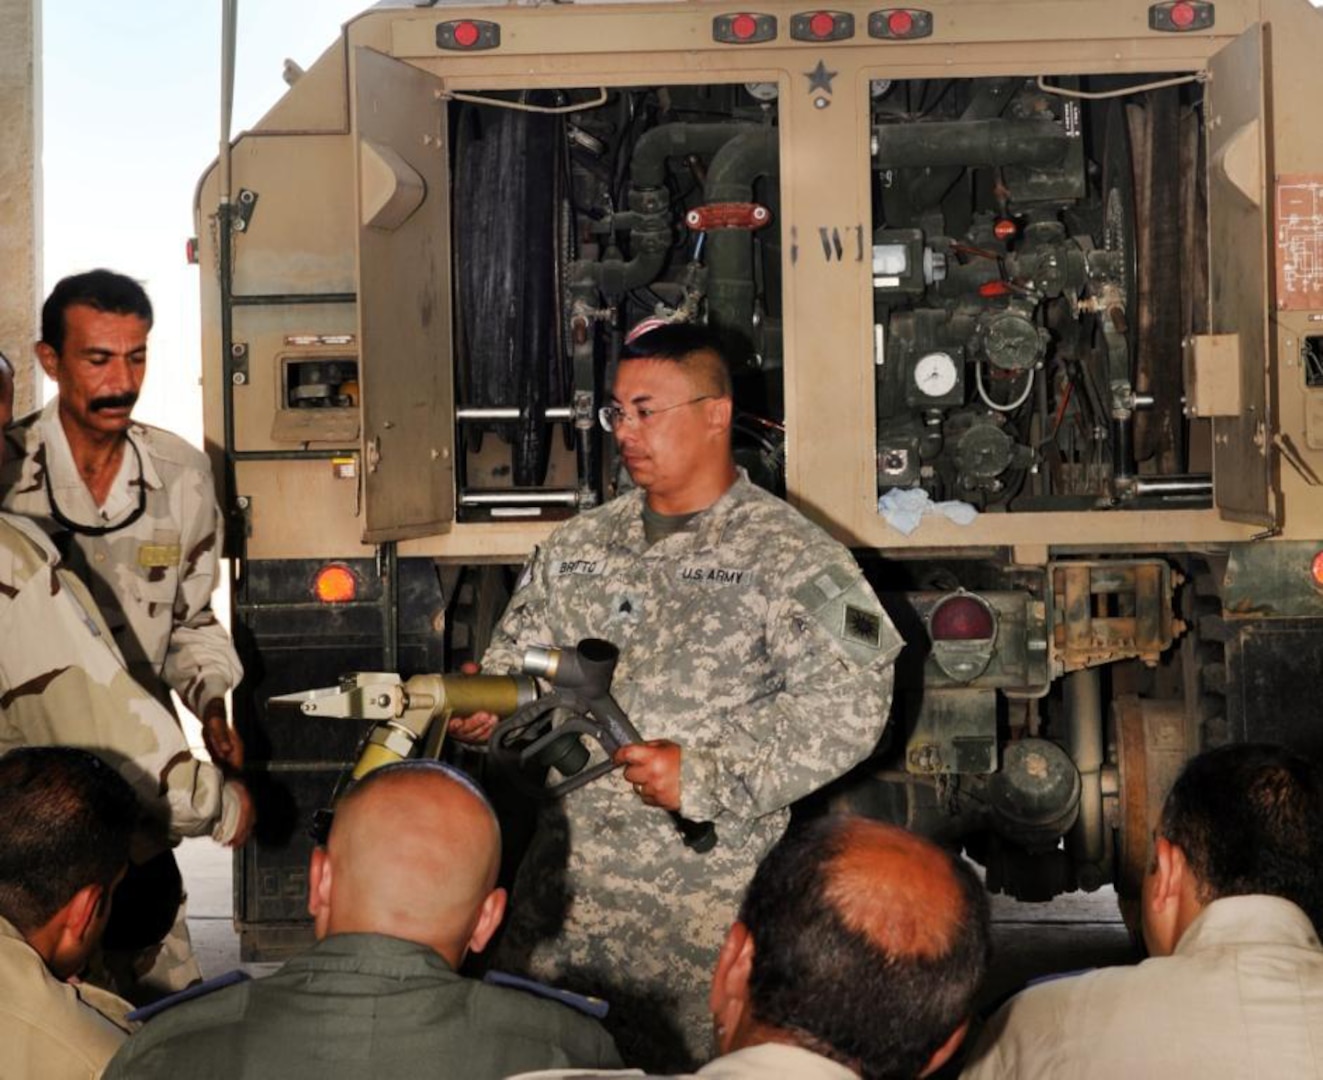 Army Sgt. Gilbert Britto of the California National Guard's Alpha Company, 640th Aviation Support Battalion, shows a class of Iraqi army personnel how to connect a fueling nozzle to the fueling module on a Heavy Expanded Mobility Tactical Truck at Camp Taji, Iraq, Sept. 13, 2011. The 640th conducted a weeklong course for the Iraqi Security Forces to prepare them to take over fueling operations once the California Guard unit departs theater.